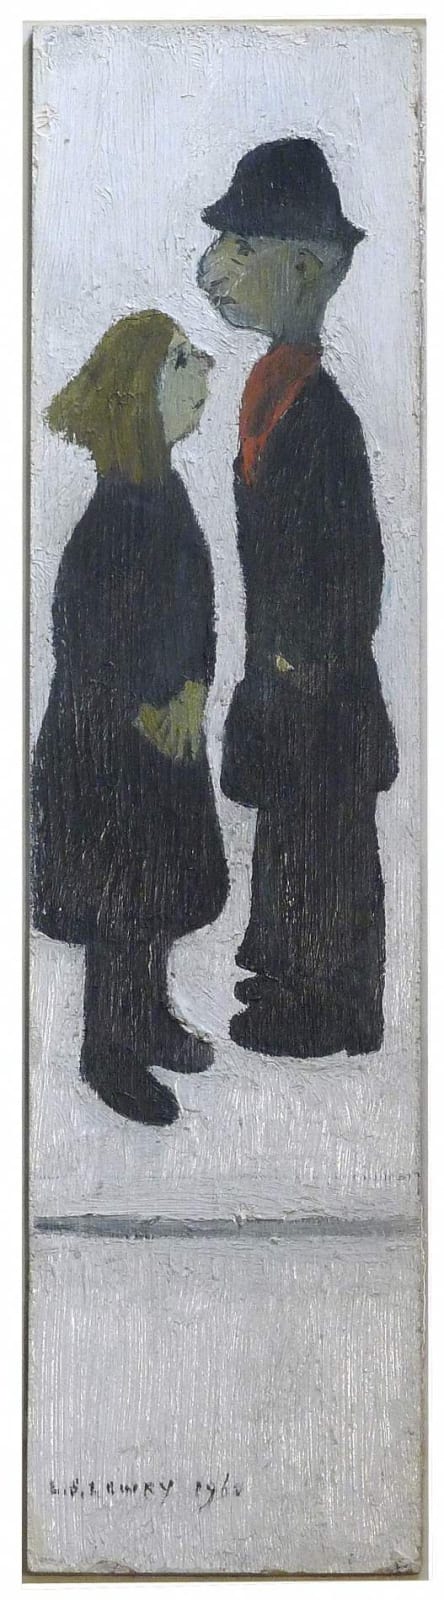 L. S. Lowry (1887-1976) The Assignation 1960 Oil on board 40 x 9.84 cm Mason Owen Collection To see and discover more about this artist click here